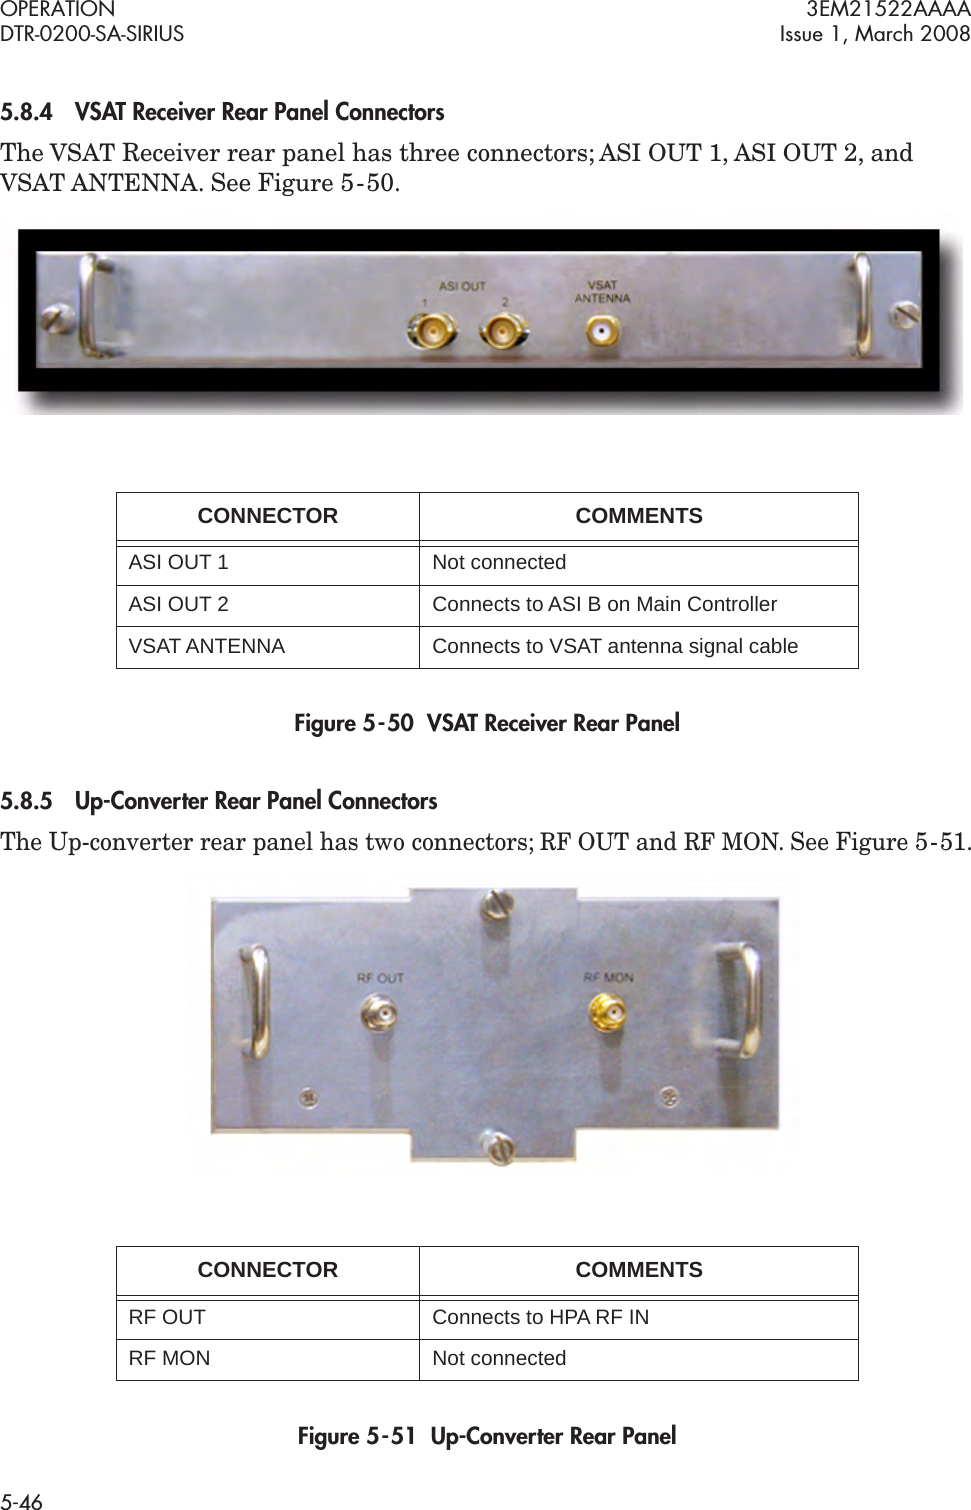 OPERATION 3EM21522AAAADTR-0200-SA-SIRIUS Issue 1, March 20085-465.8.4VSAT Receiver Rear Panel ConnectorsThe VSAT Receiver rear panel has three connectors; ASI OUT 1, ASI OUT 2, and VSAT ANTENNA. See Figure 5  -  50.Figure 5  -  50  VSAT Receiver Rear Panel5.8.5Up-Converter Rear Panel ConnectorsThe Up-converter rear panel has two connectors; RF OUT and RF MON. See Figure 5  -  51.Figure 5  -  51  Up-Converter Rear PanelCONNECTOR COMMENTSASI OUT 1 Not connectedASI OUT 2 Connects to ASI B on Main ControllerVSAT ANTENNA Connects to VSAT antenna signal cableCONNECTOR COMMENTSRF OUT Connects to HPA RF INRF MON Not connected